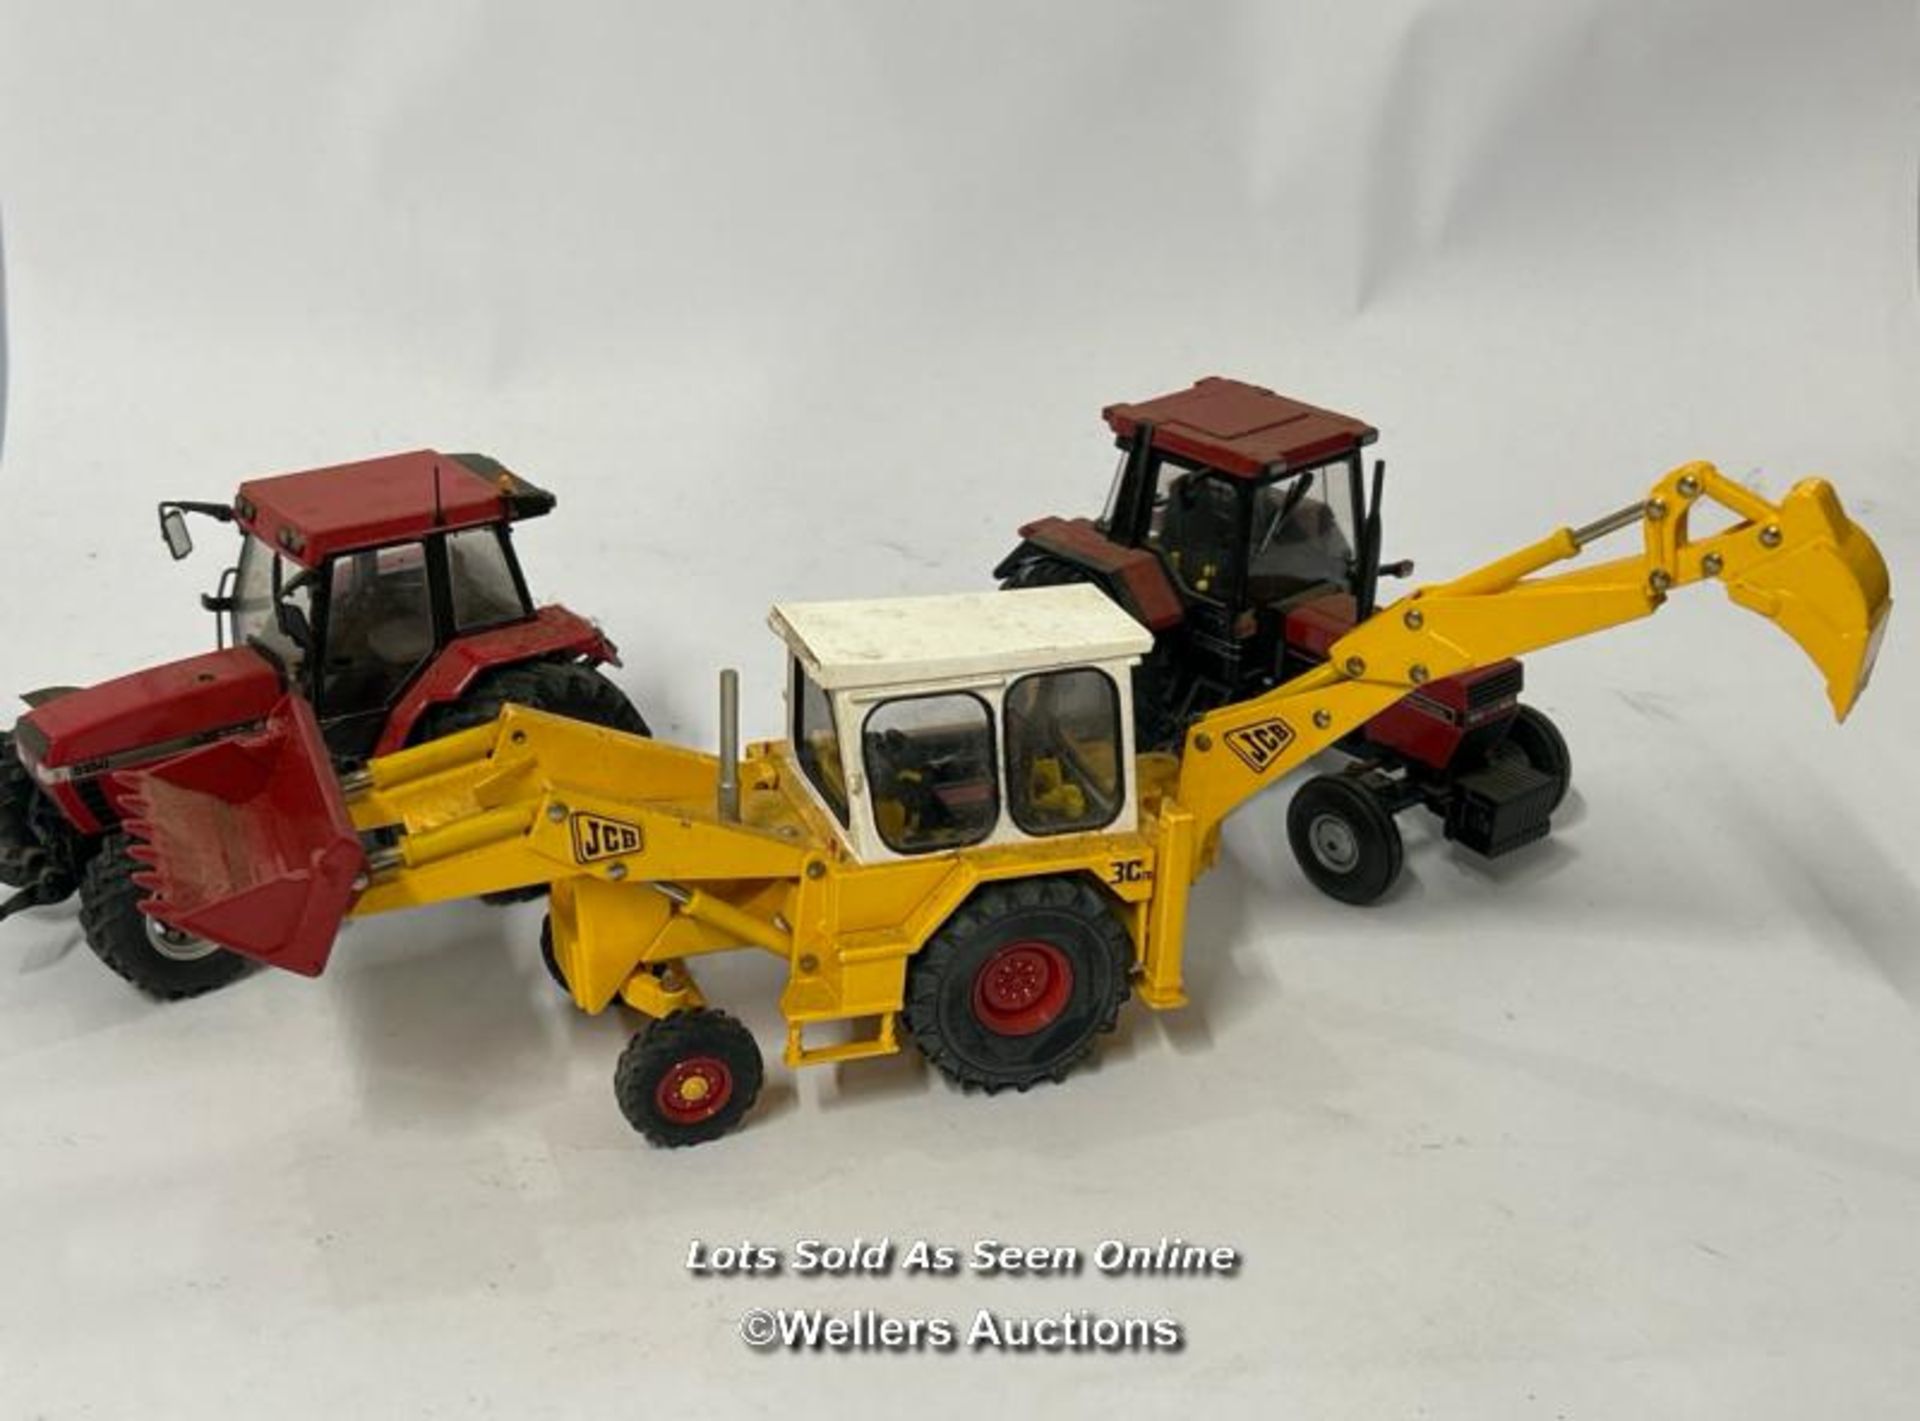 Britain's JCB digger no. 42905 with two model tractors / AN4